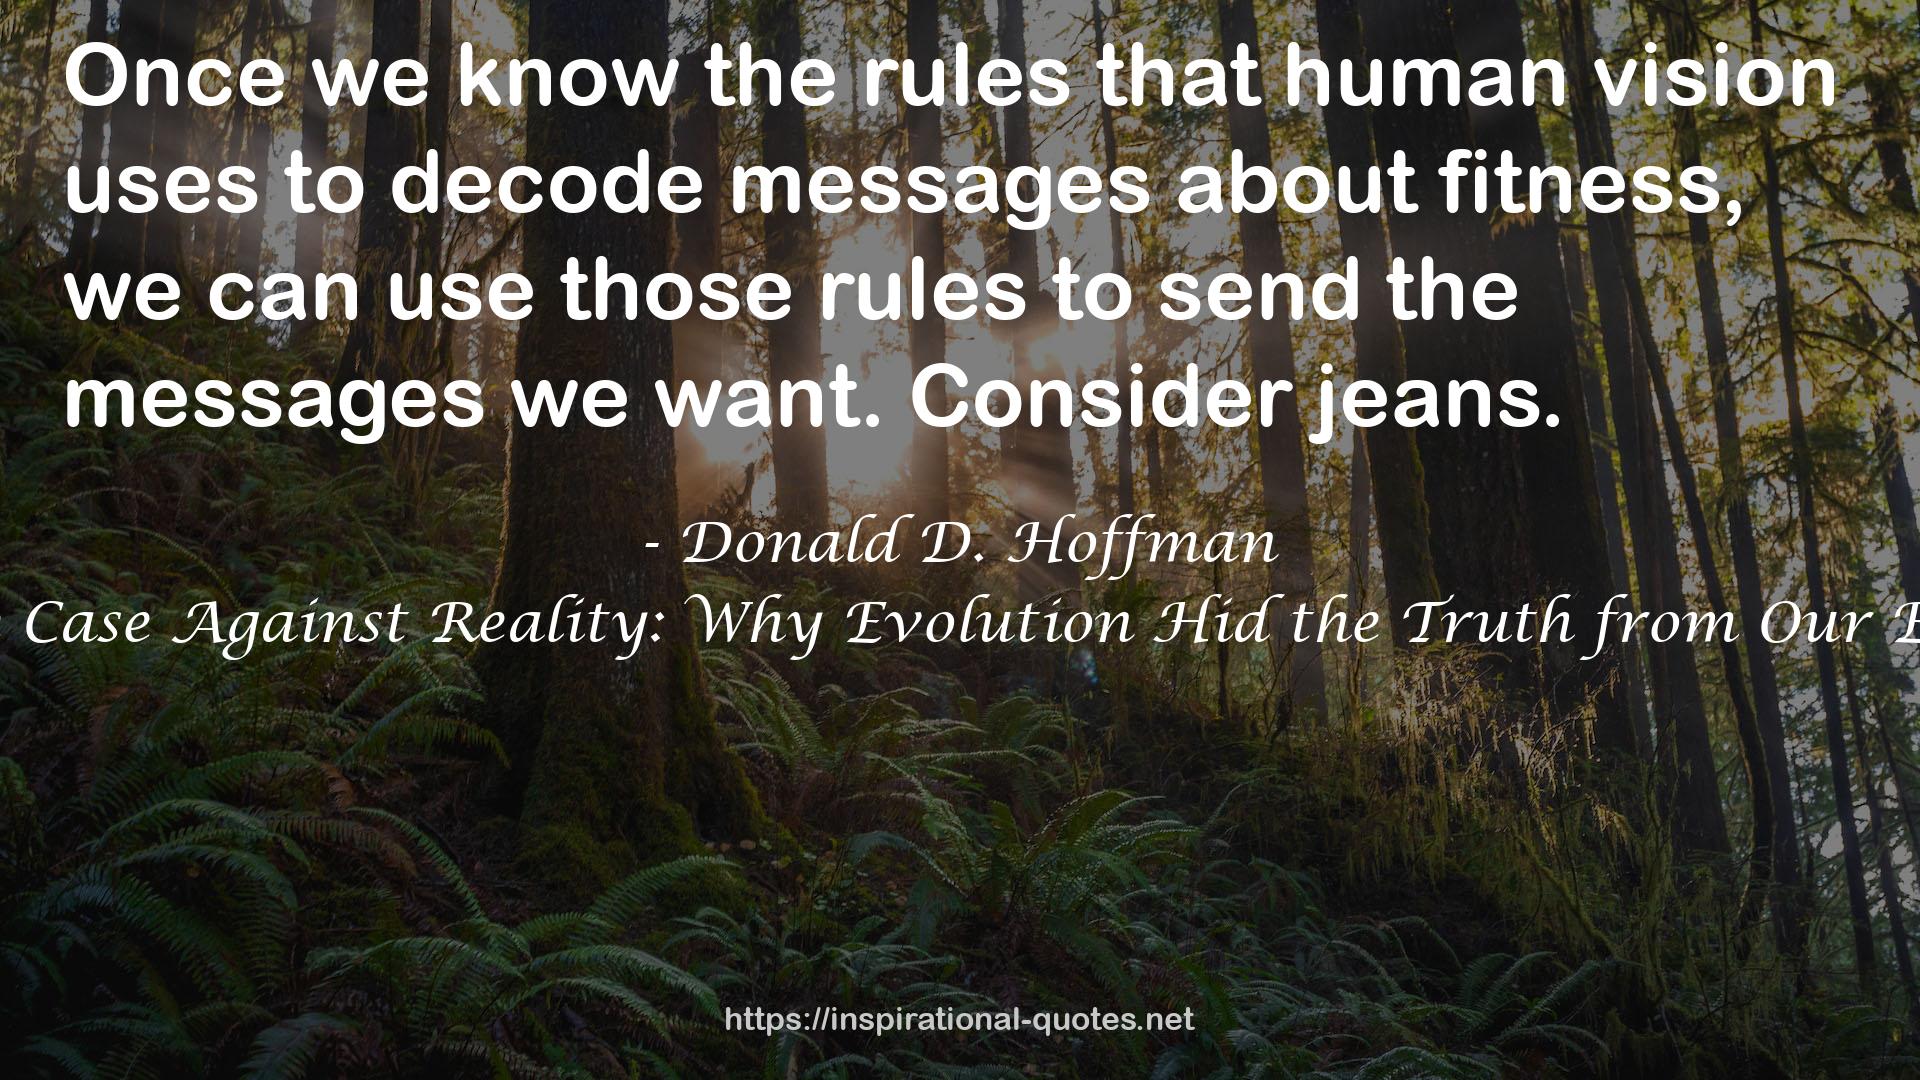 The Case Against Reality: Why Evolution Hid the Truth from Our Eyes QUOTES